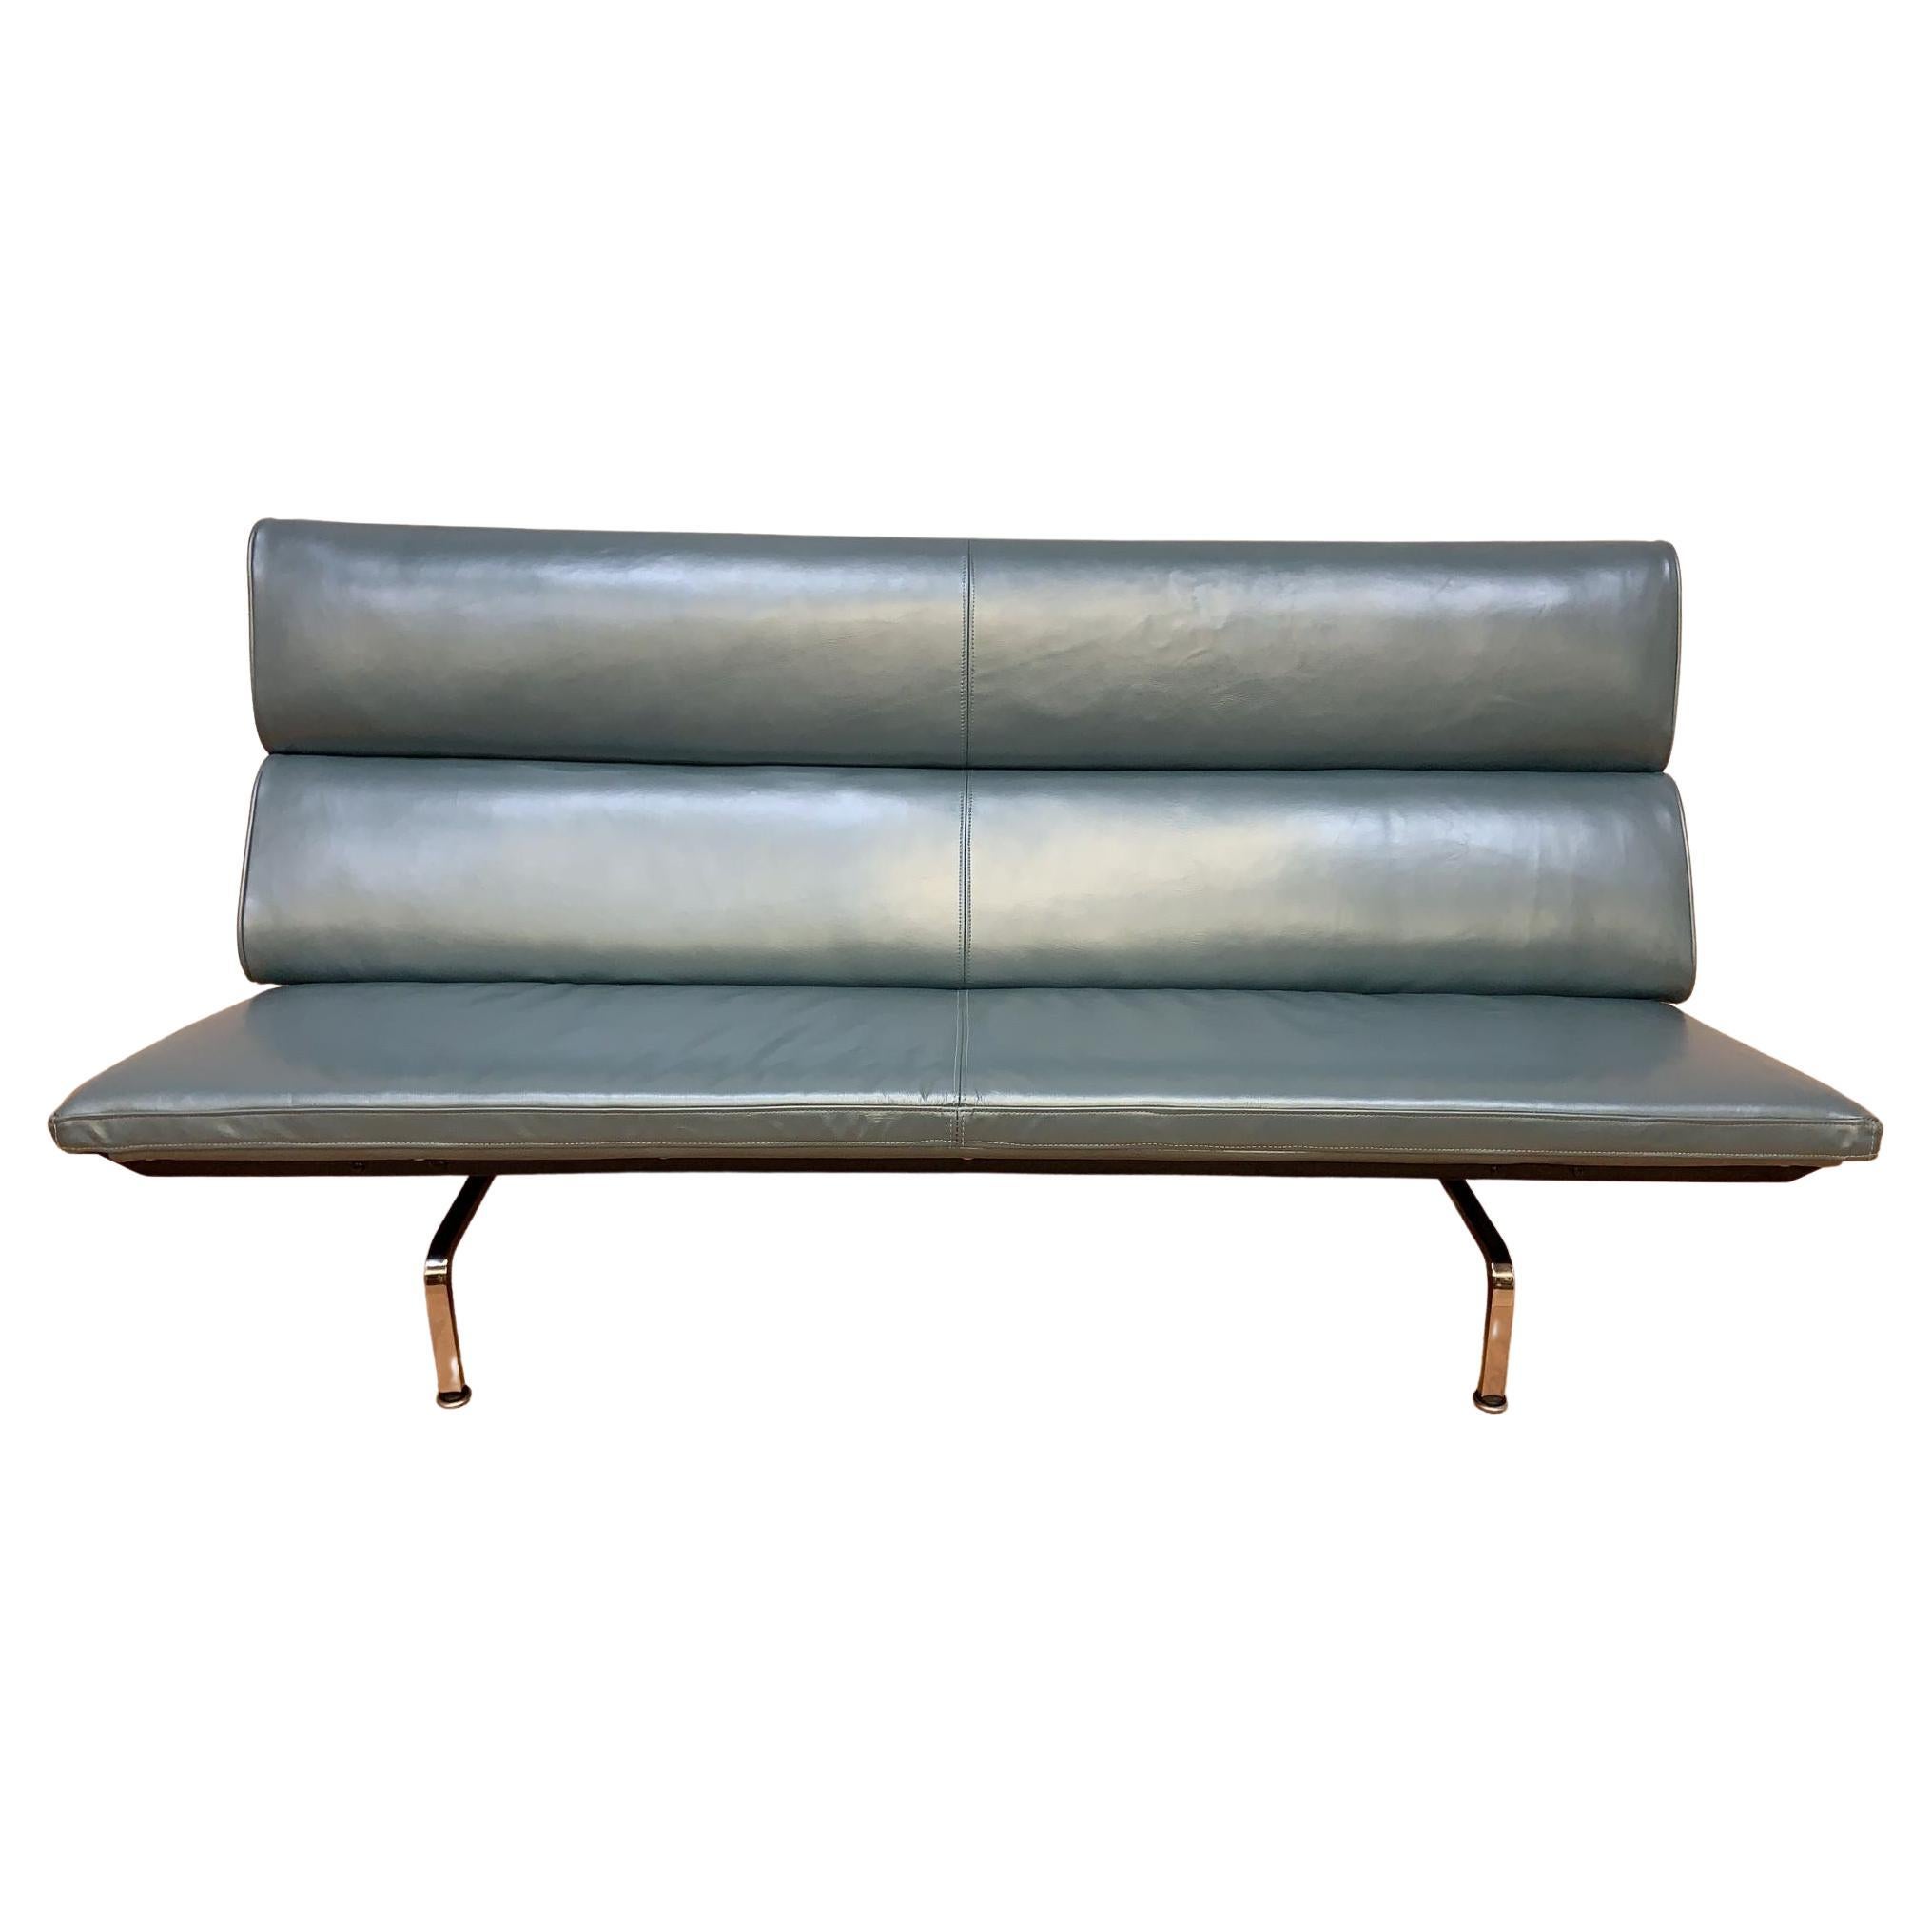 Vintage Compact Herman Miller Sofa Newly Upholstered in Metallic Teal Leather For Sale